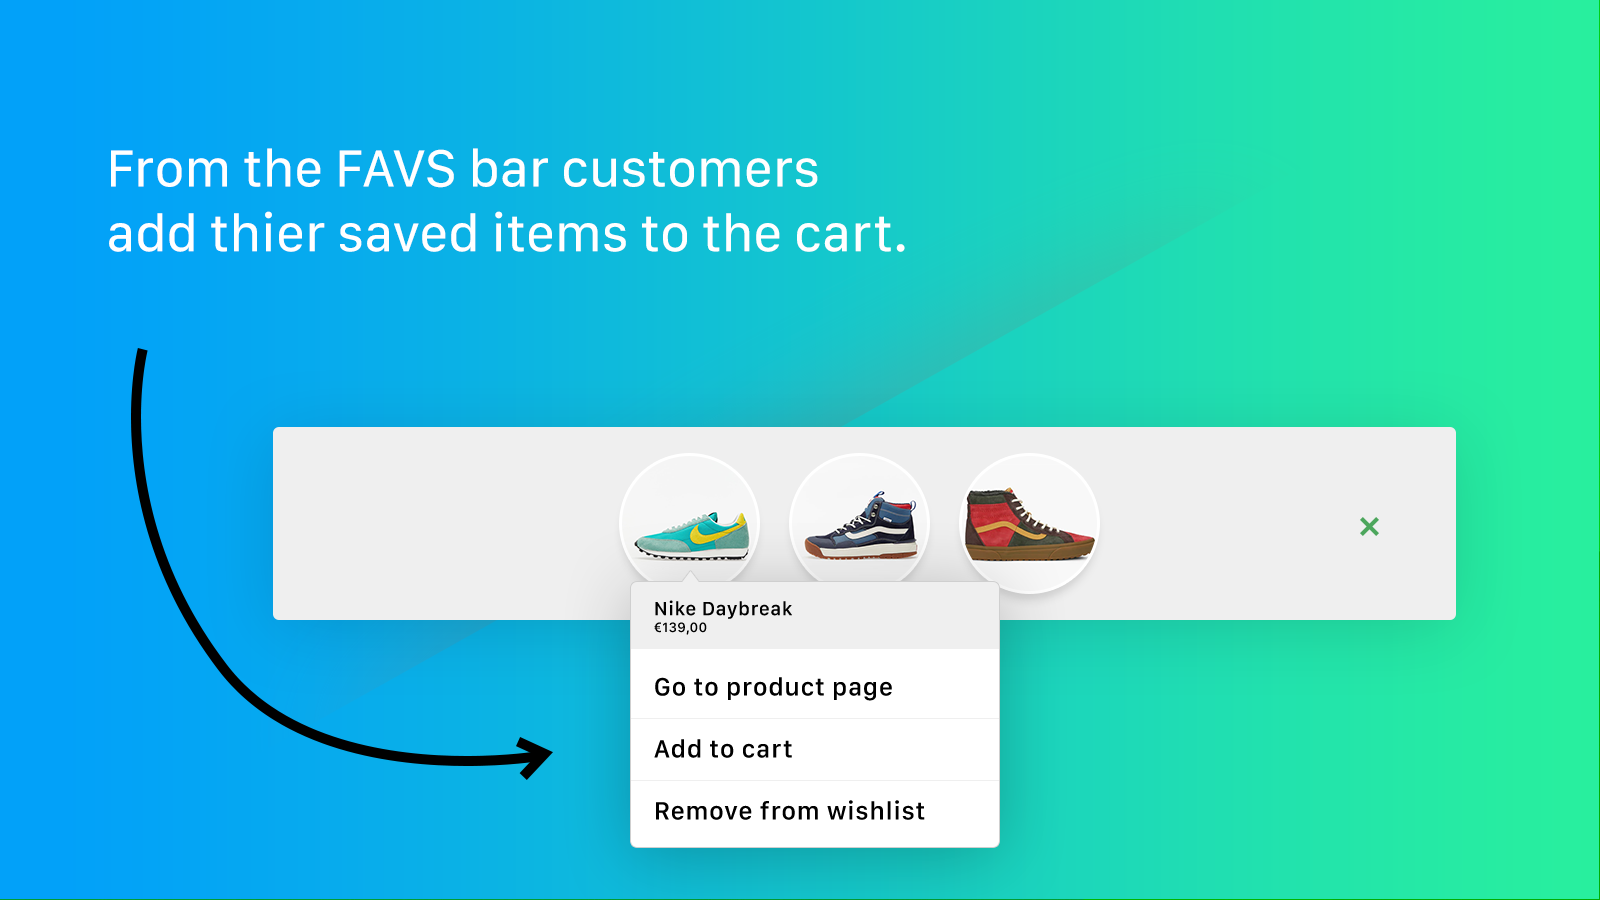 Customers will add their saved items to the cart.